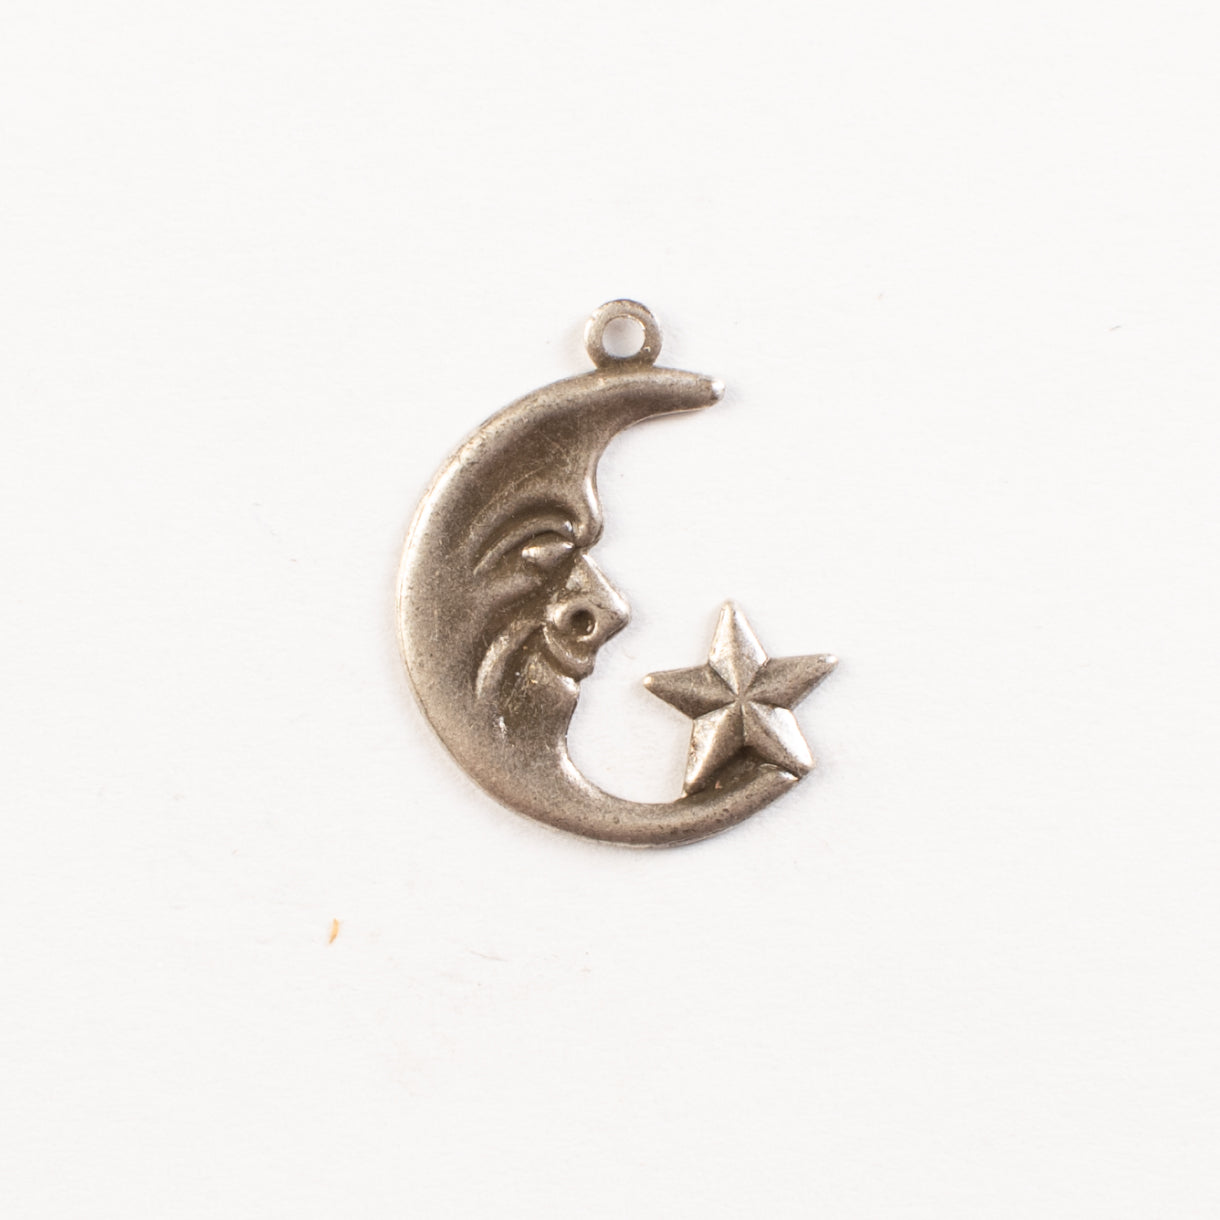 28mm Moon and Star Charm, facing Right, Antique Silver, pack of 6